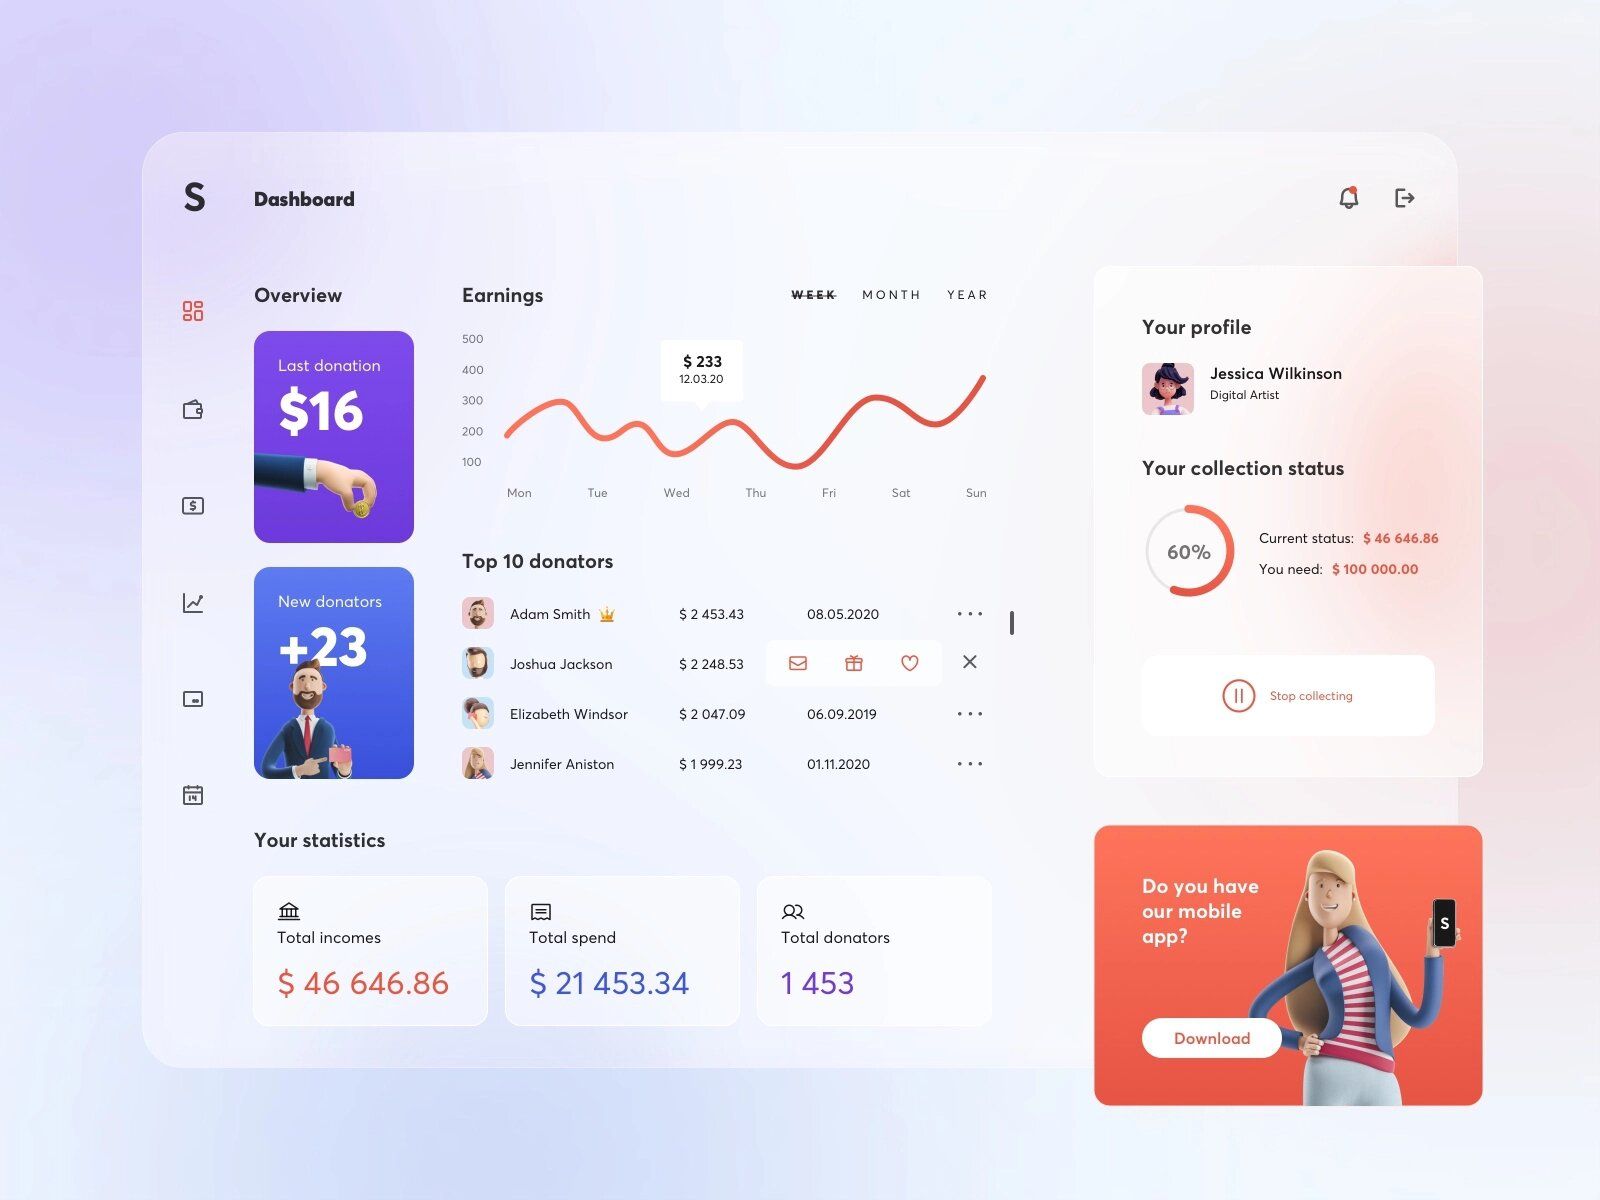 A crowdfunding platform like Kickstarter should provide tools for fundraisers to actually start a crowdfunding campaign and track the incoming funding afterward (*image by [Olga Staromłyńska](https://dribbble.com/olga_staromlynska){ rel="nofollow" target="_blank" .default-md}*)